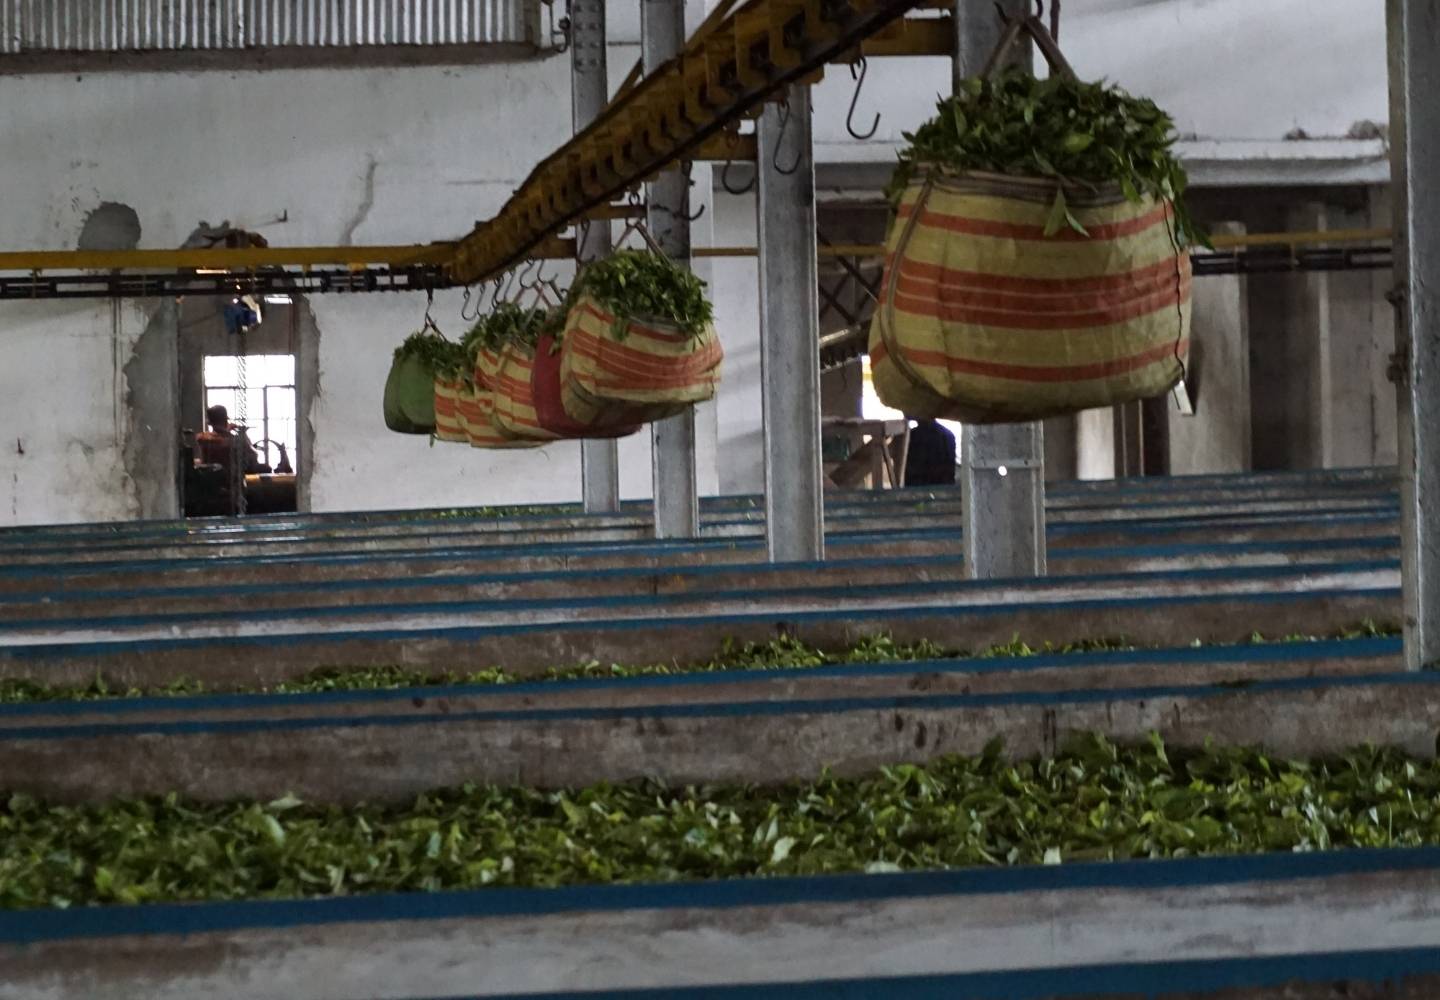 Cut Tear Curl (CTC) machinery in India, processing freshly picked tea leaves. Huge bags of tea leaves are hanging on a pulley system, which is sat above belts of tea leaves.